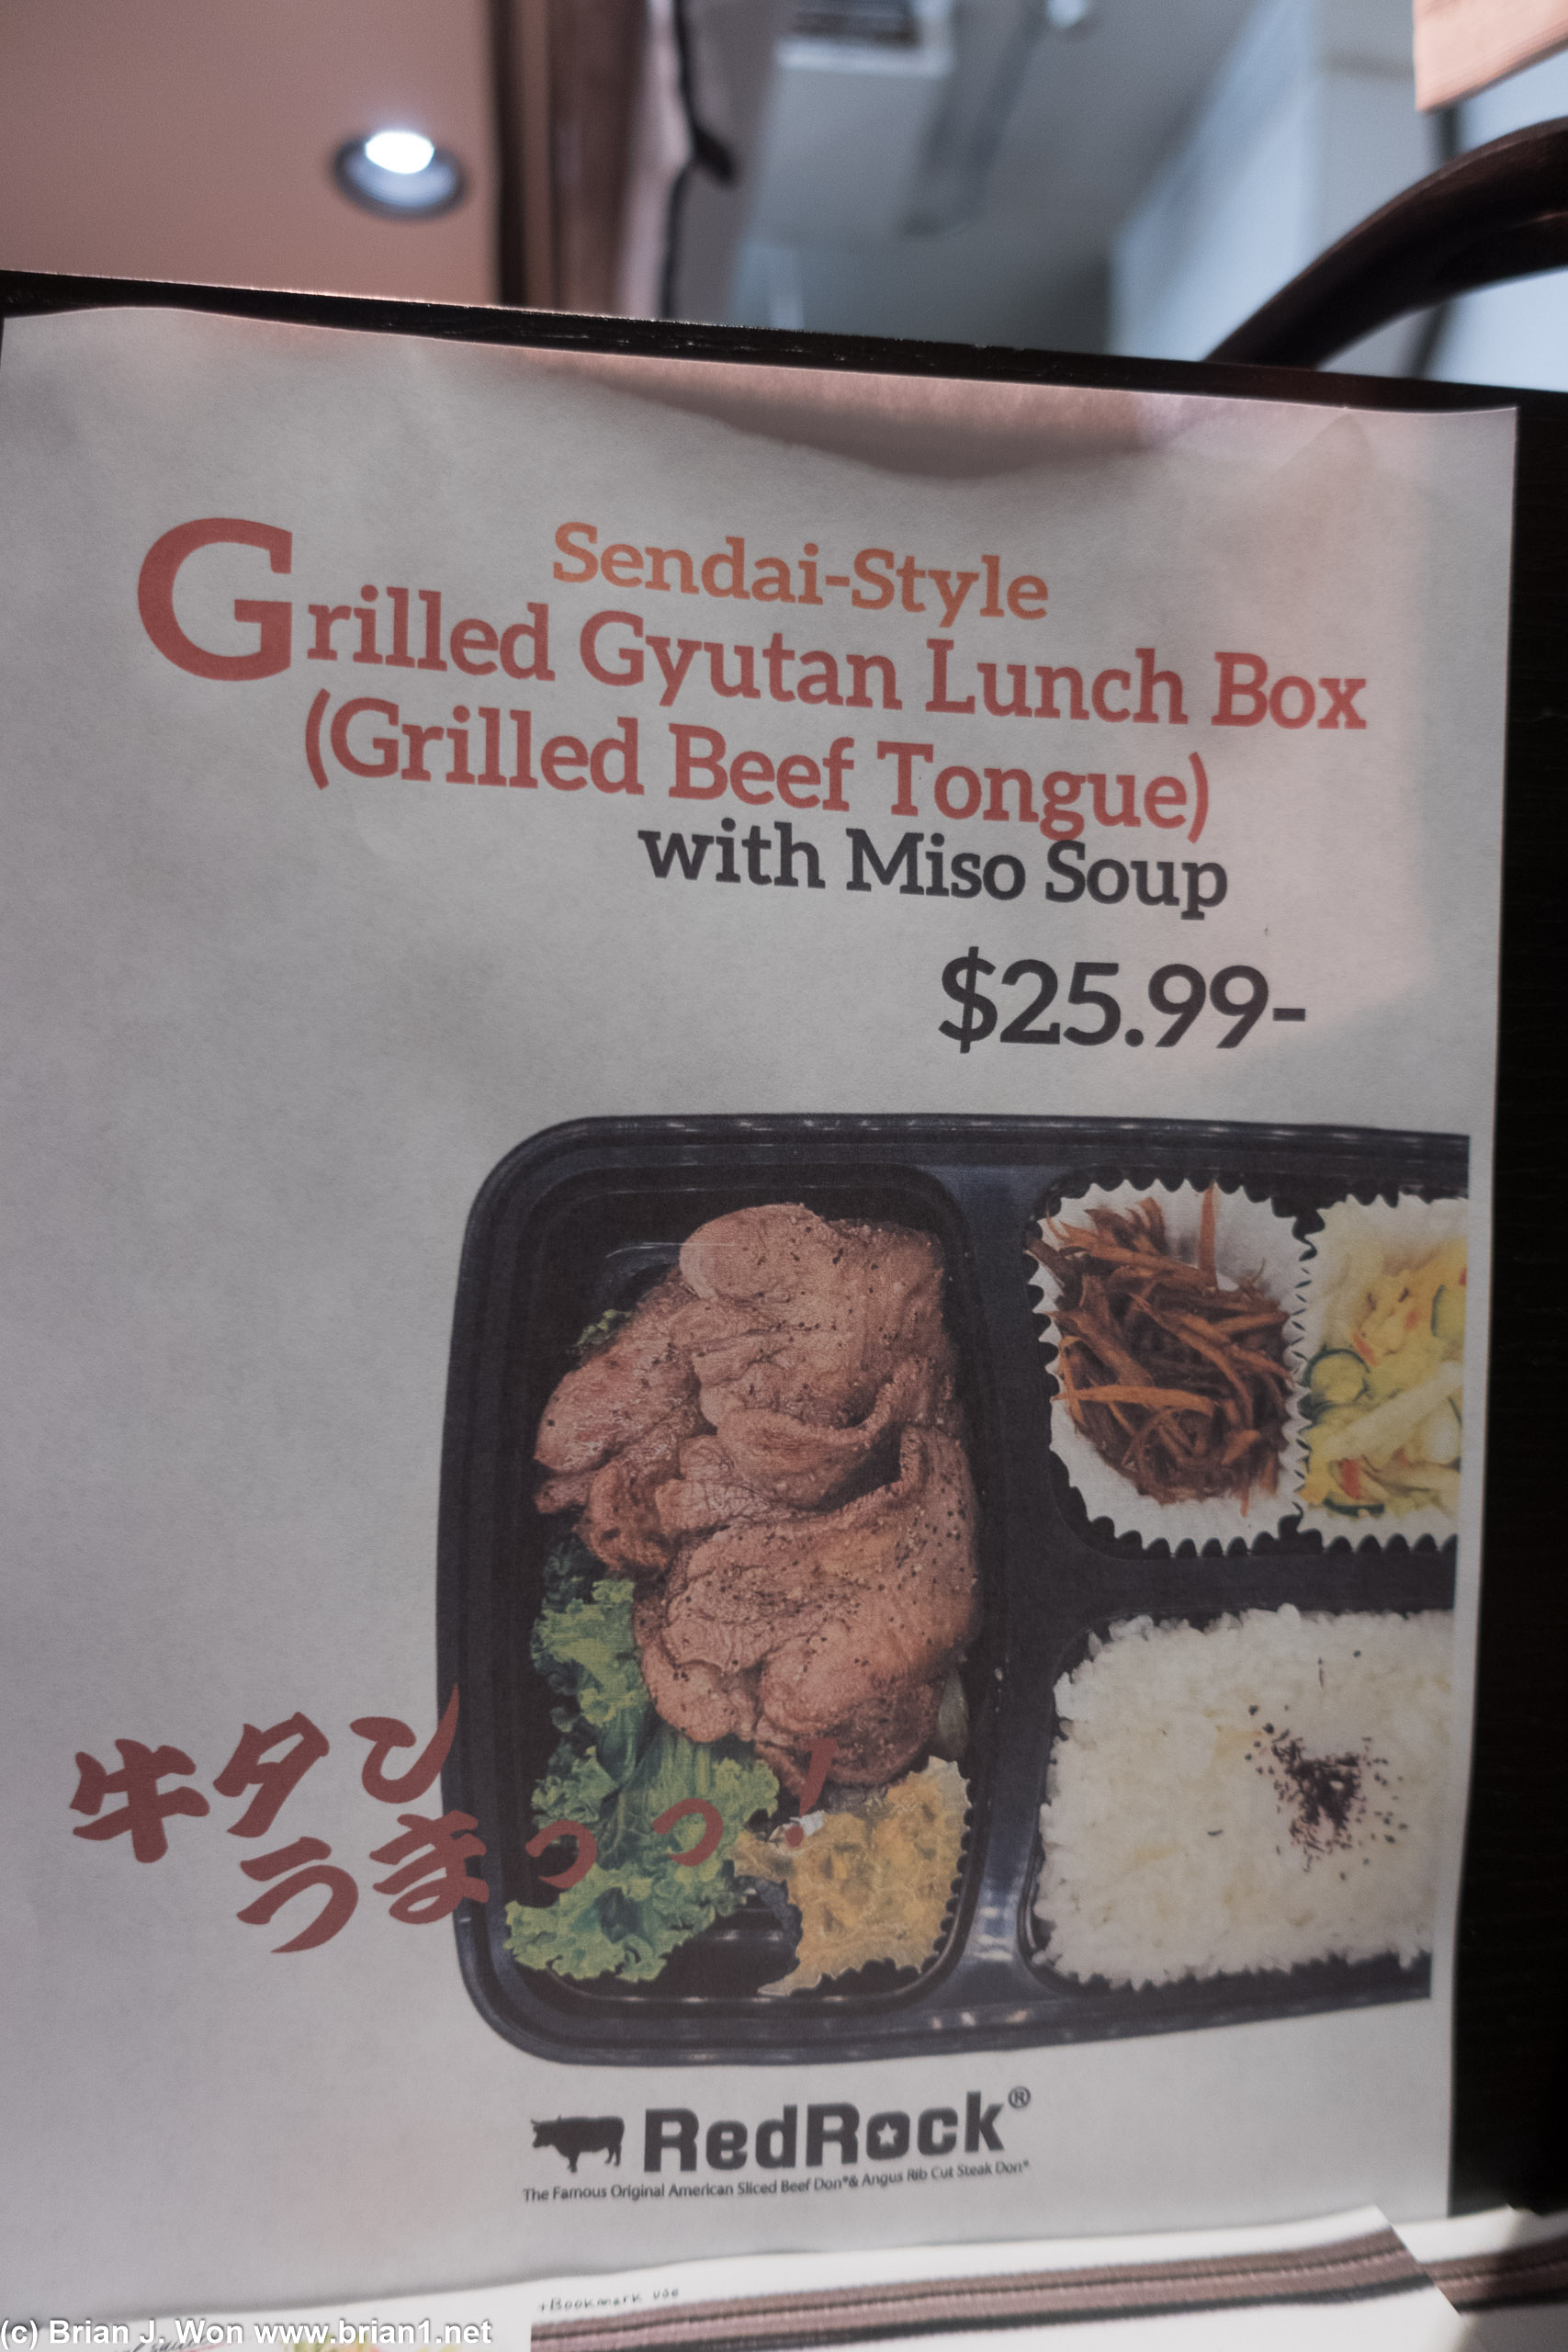 Lunch box sounds tasty.